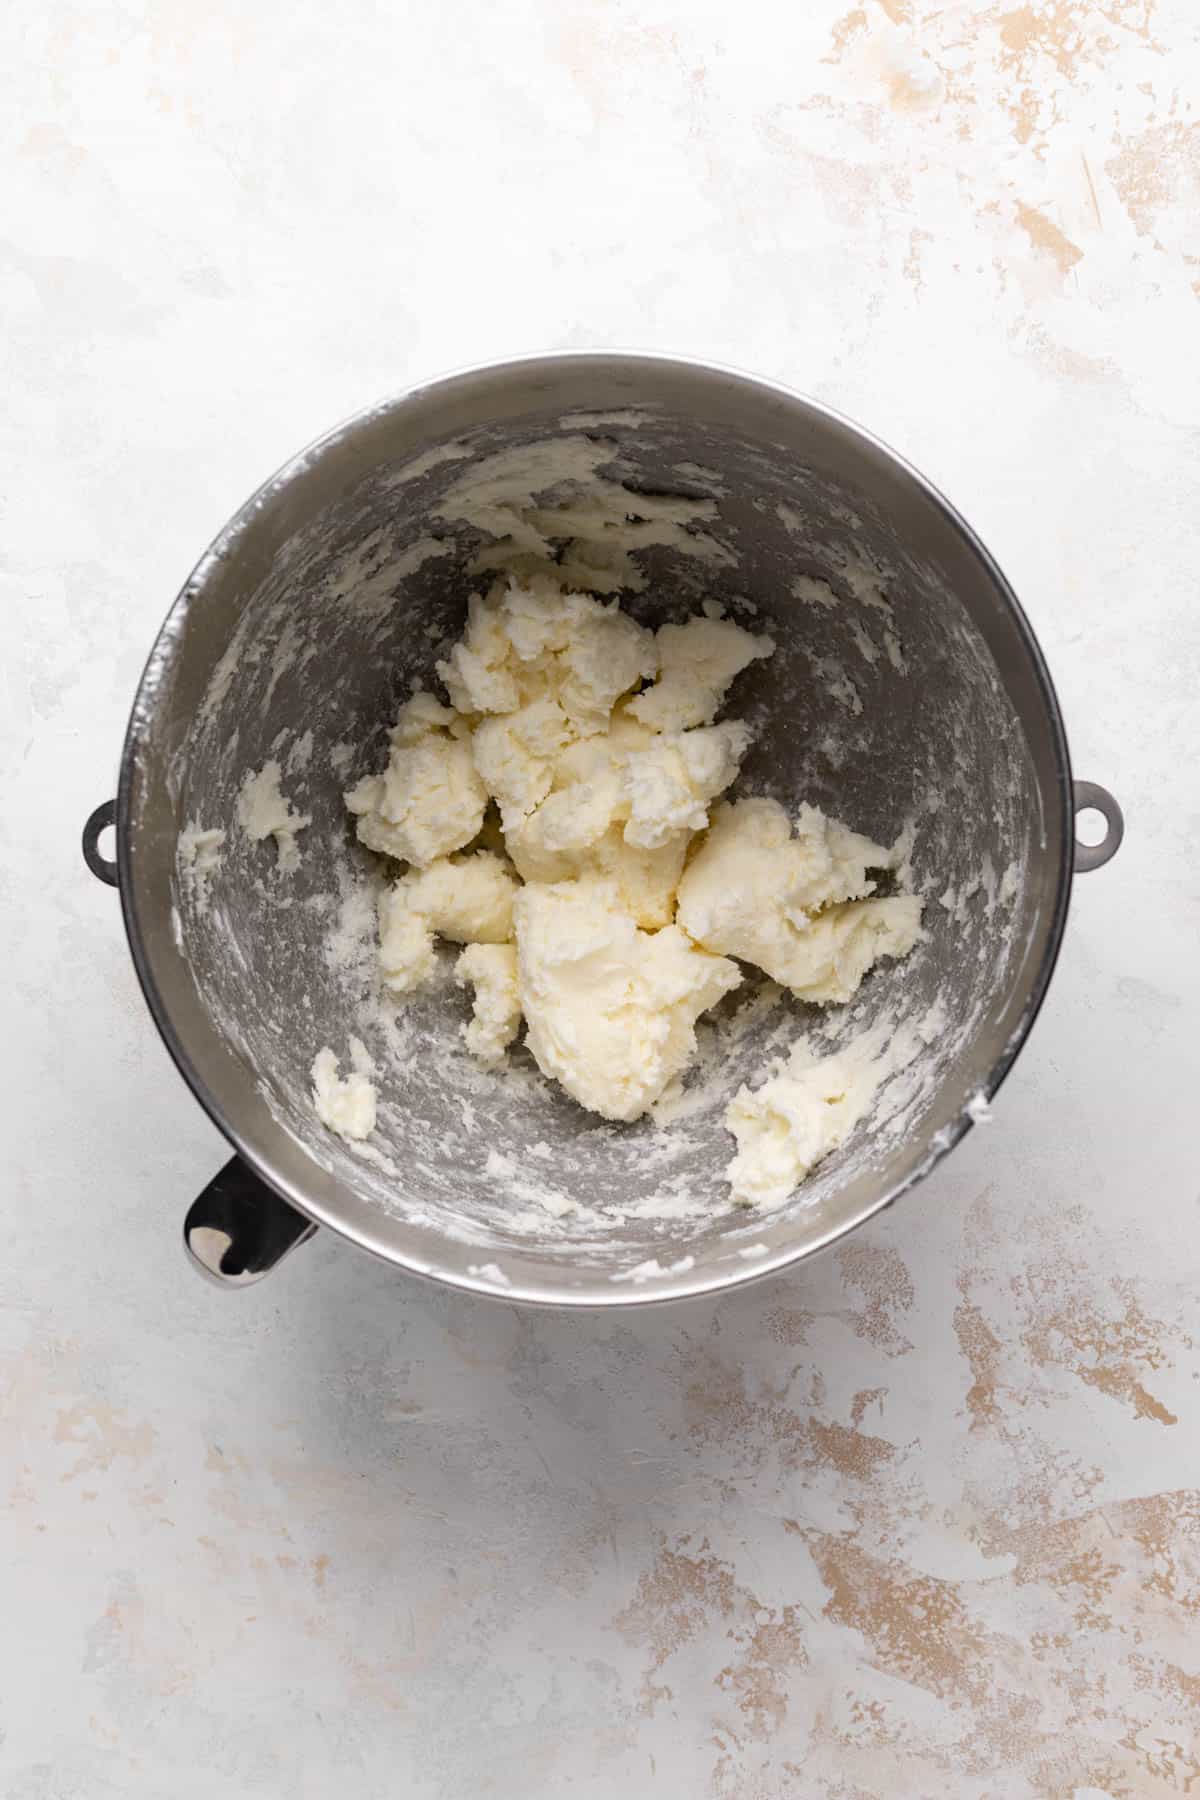 Creamed butter and powdered sugar in a metal stand mixer bowl set on a flat surface.